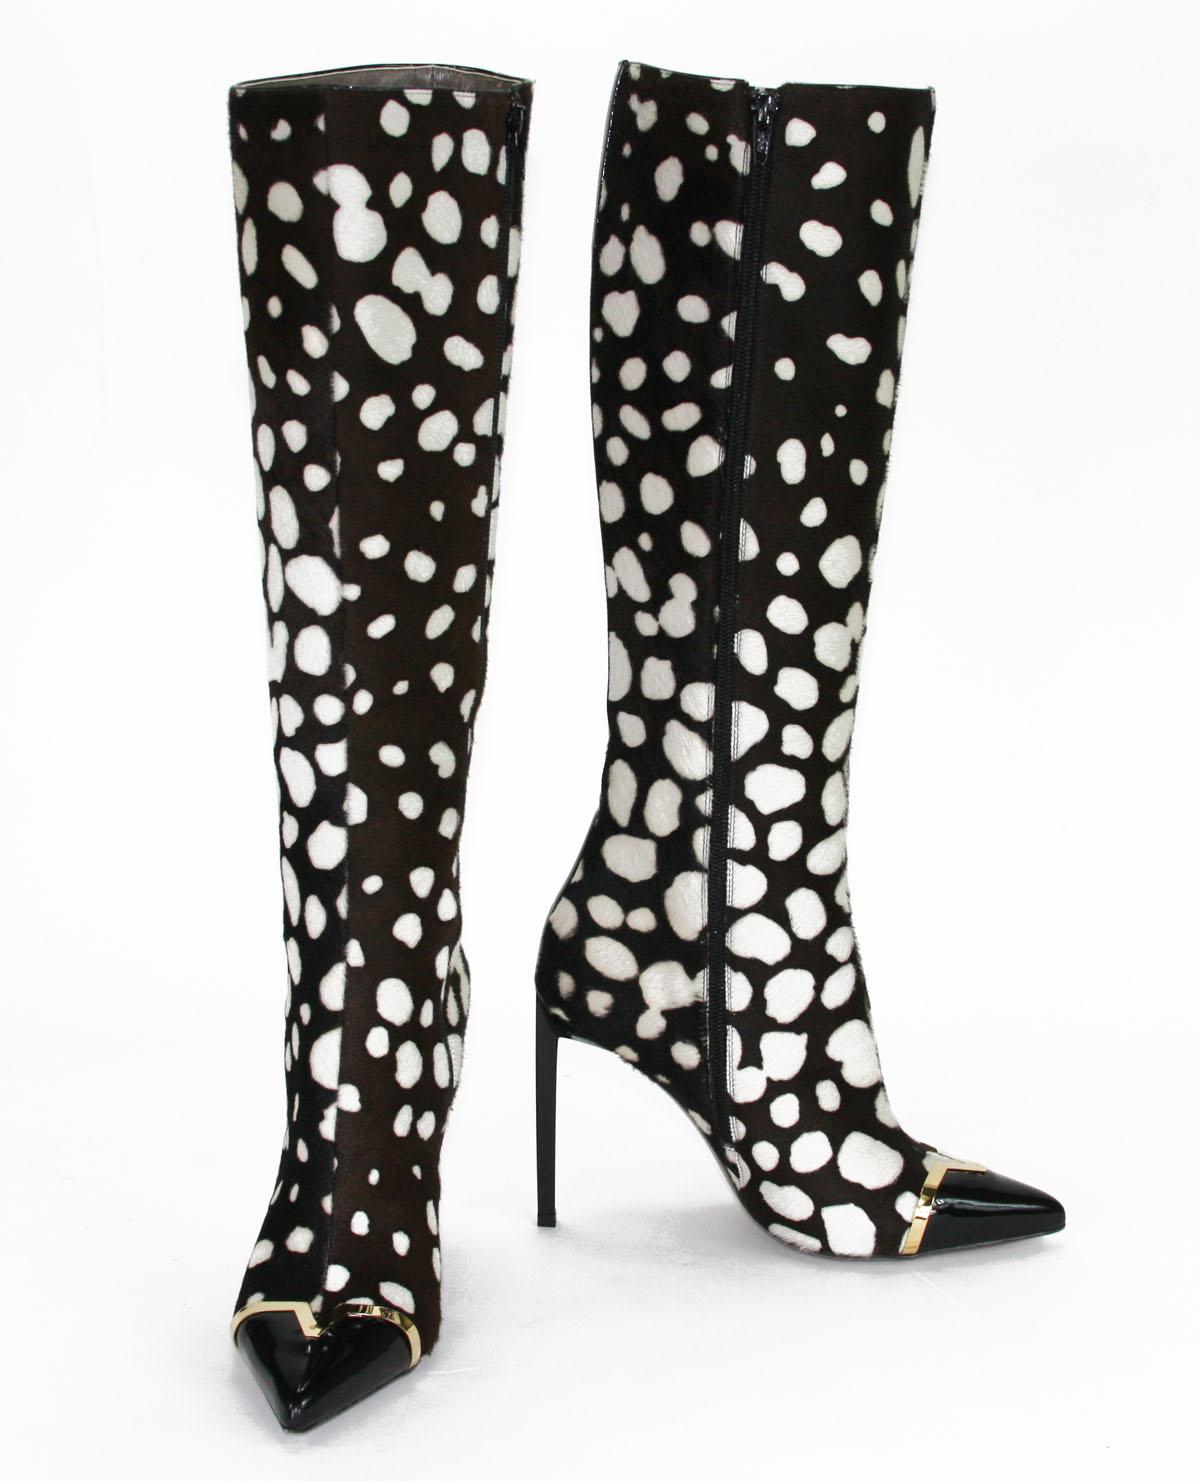 New Versace Collection Leopard Print High Heel Tall Boots
Nobody can ignore these black and white leopard print boots from Versace Collection - Wearing these boots you are always distinctive!
Designer size 38 - US 8
Featuring a patent leather